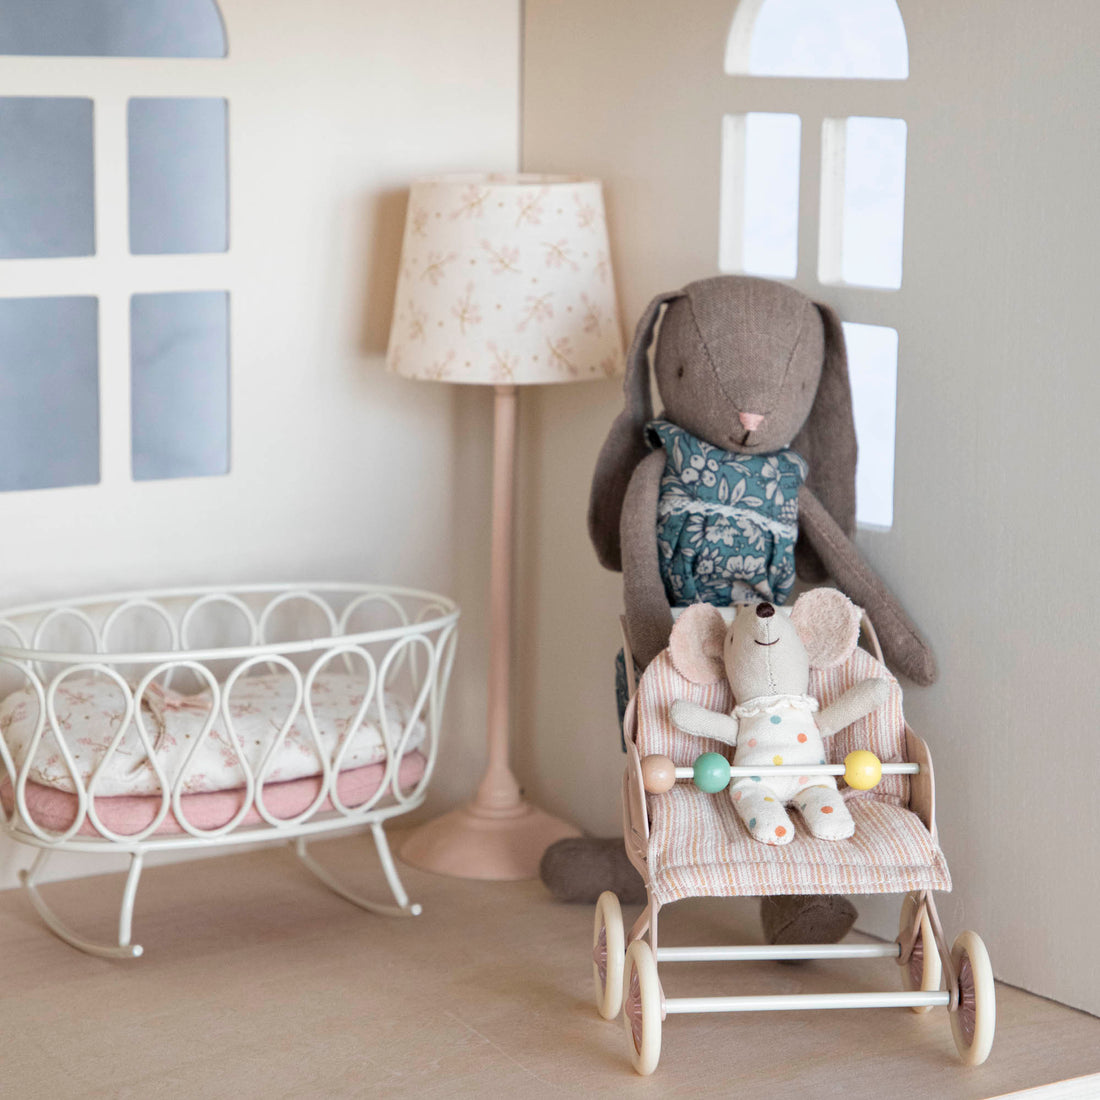 Plush rabbit toys staged in a dollhouse setting with a miniature crib, lamp, and Maileg Baby Mice Stroller.